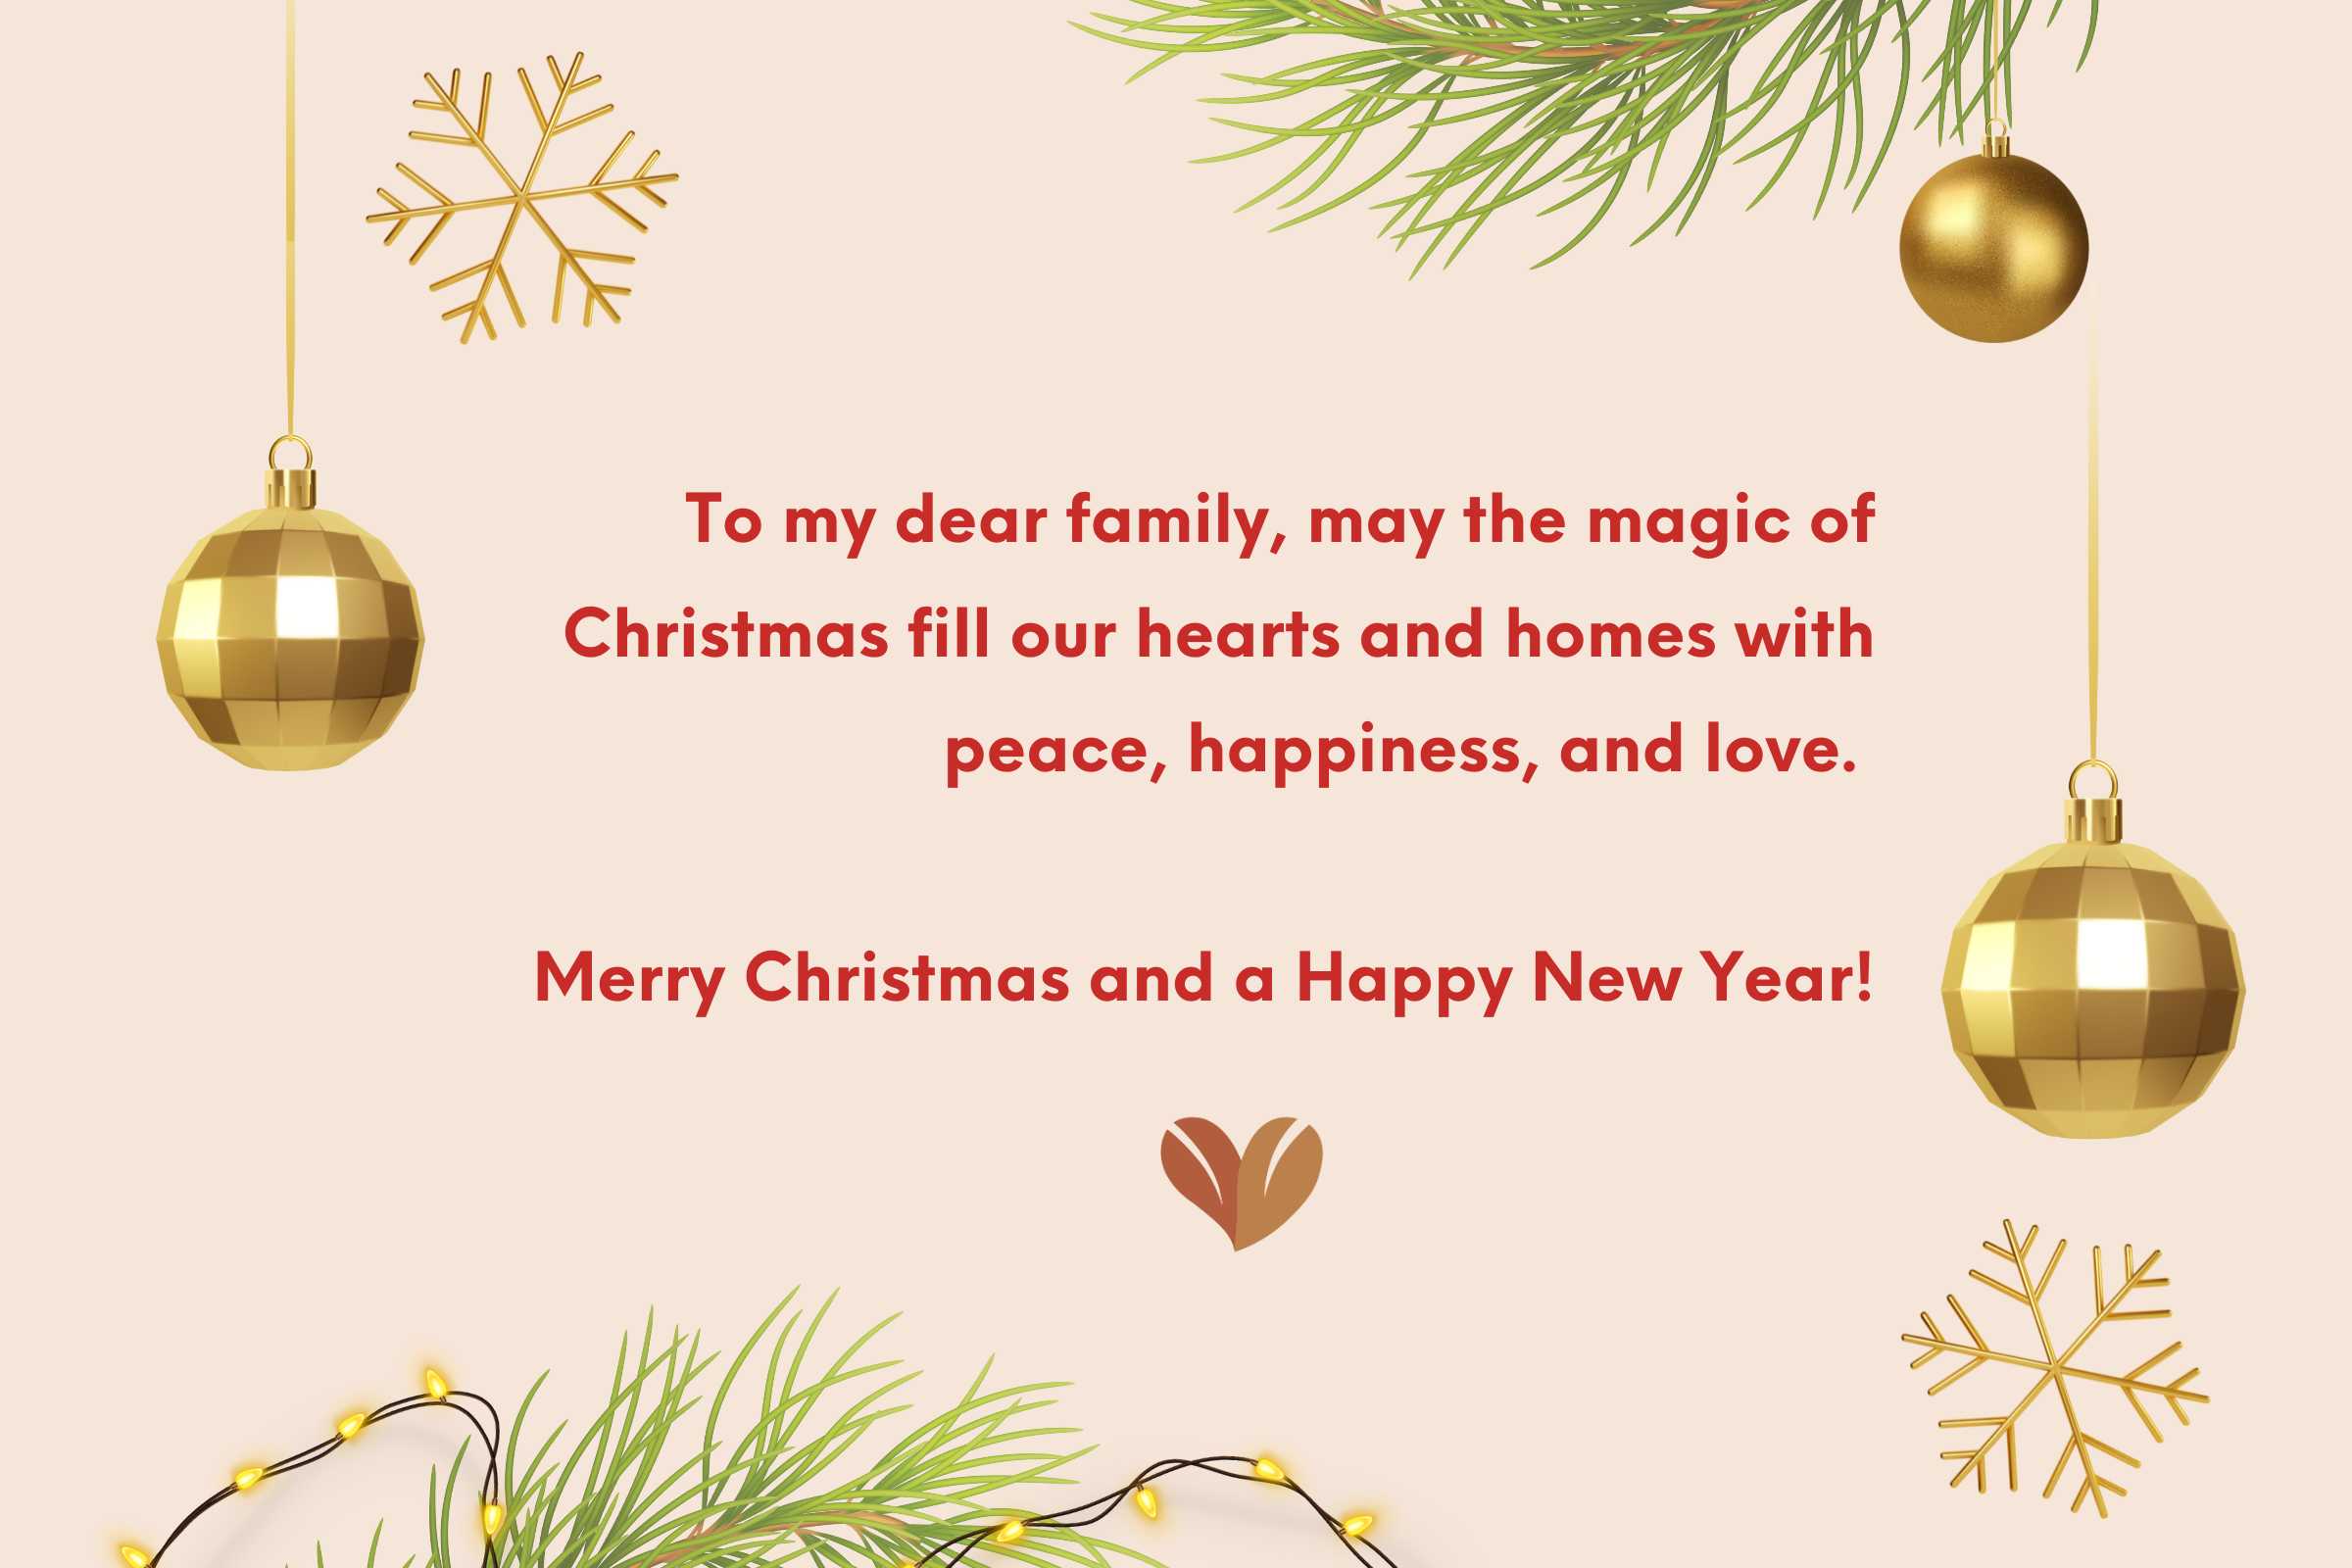 May the magic of Merry Christmas wishes filled our hearts with happiness